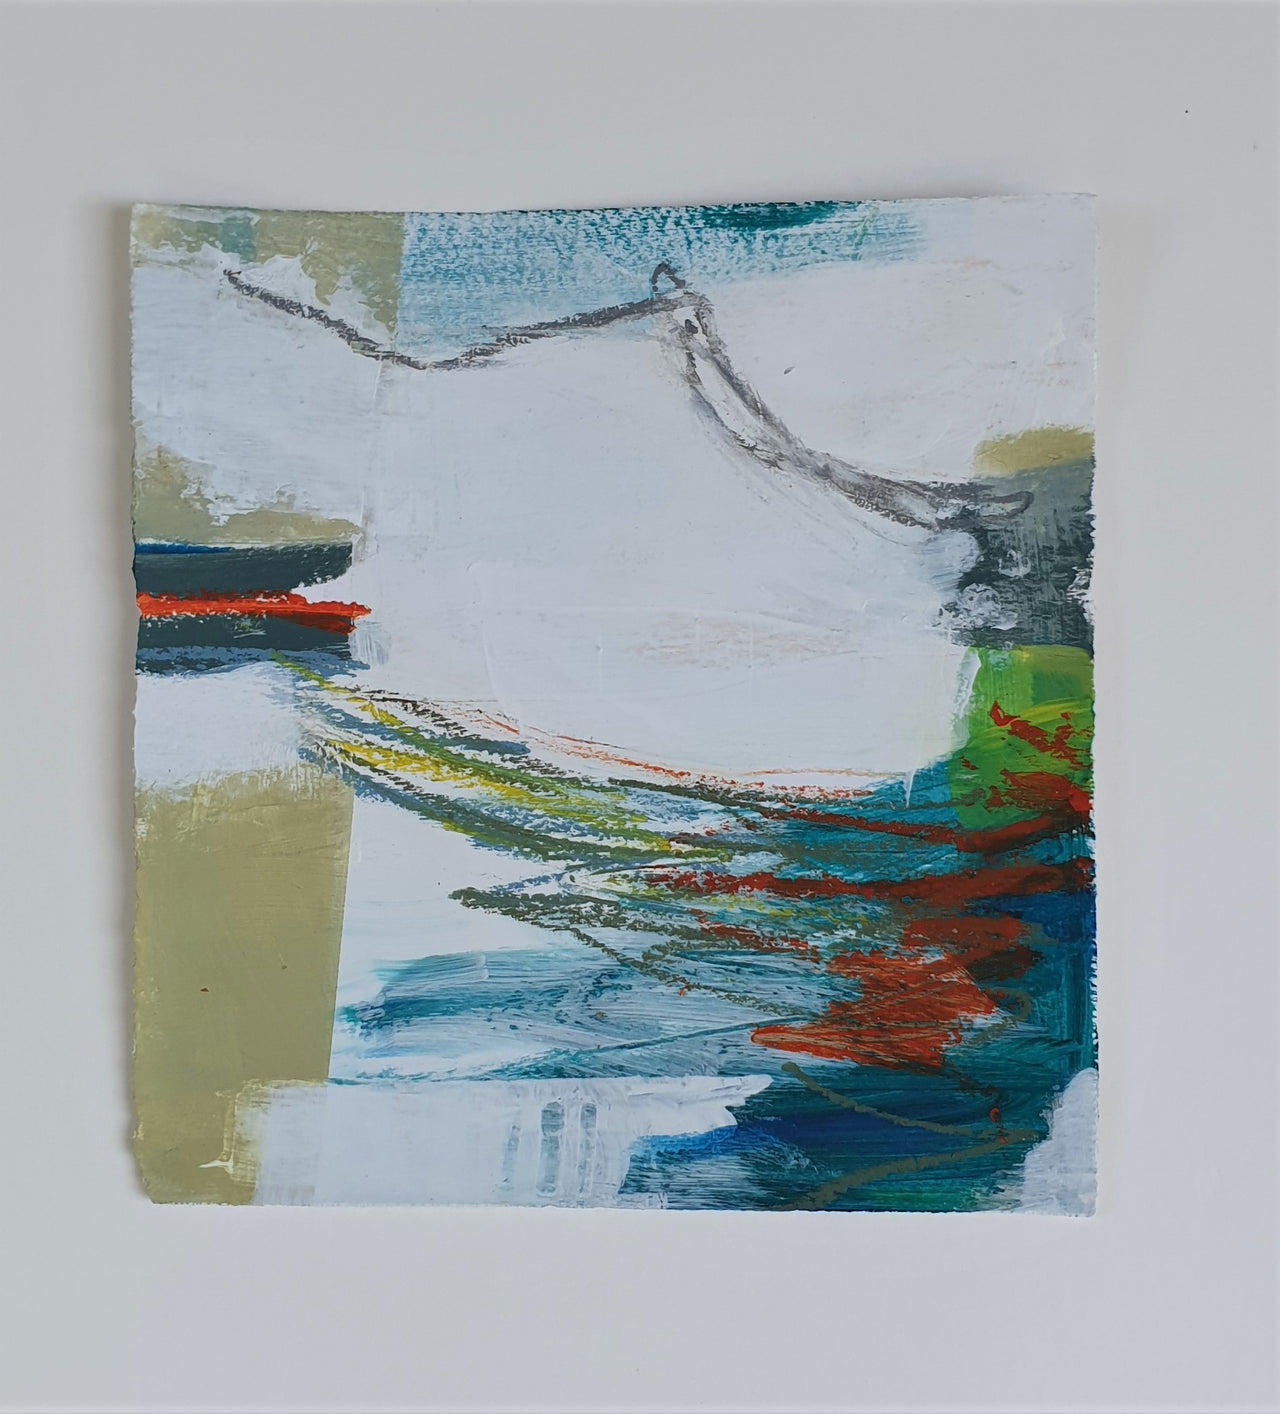 Abstract image by artist Natalie Day, with white, blue and brick red pastels